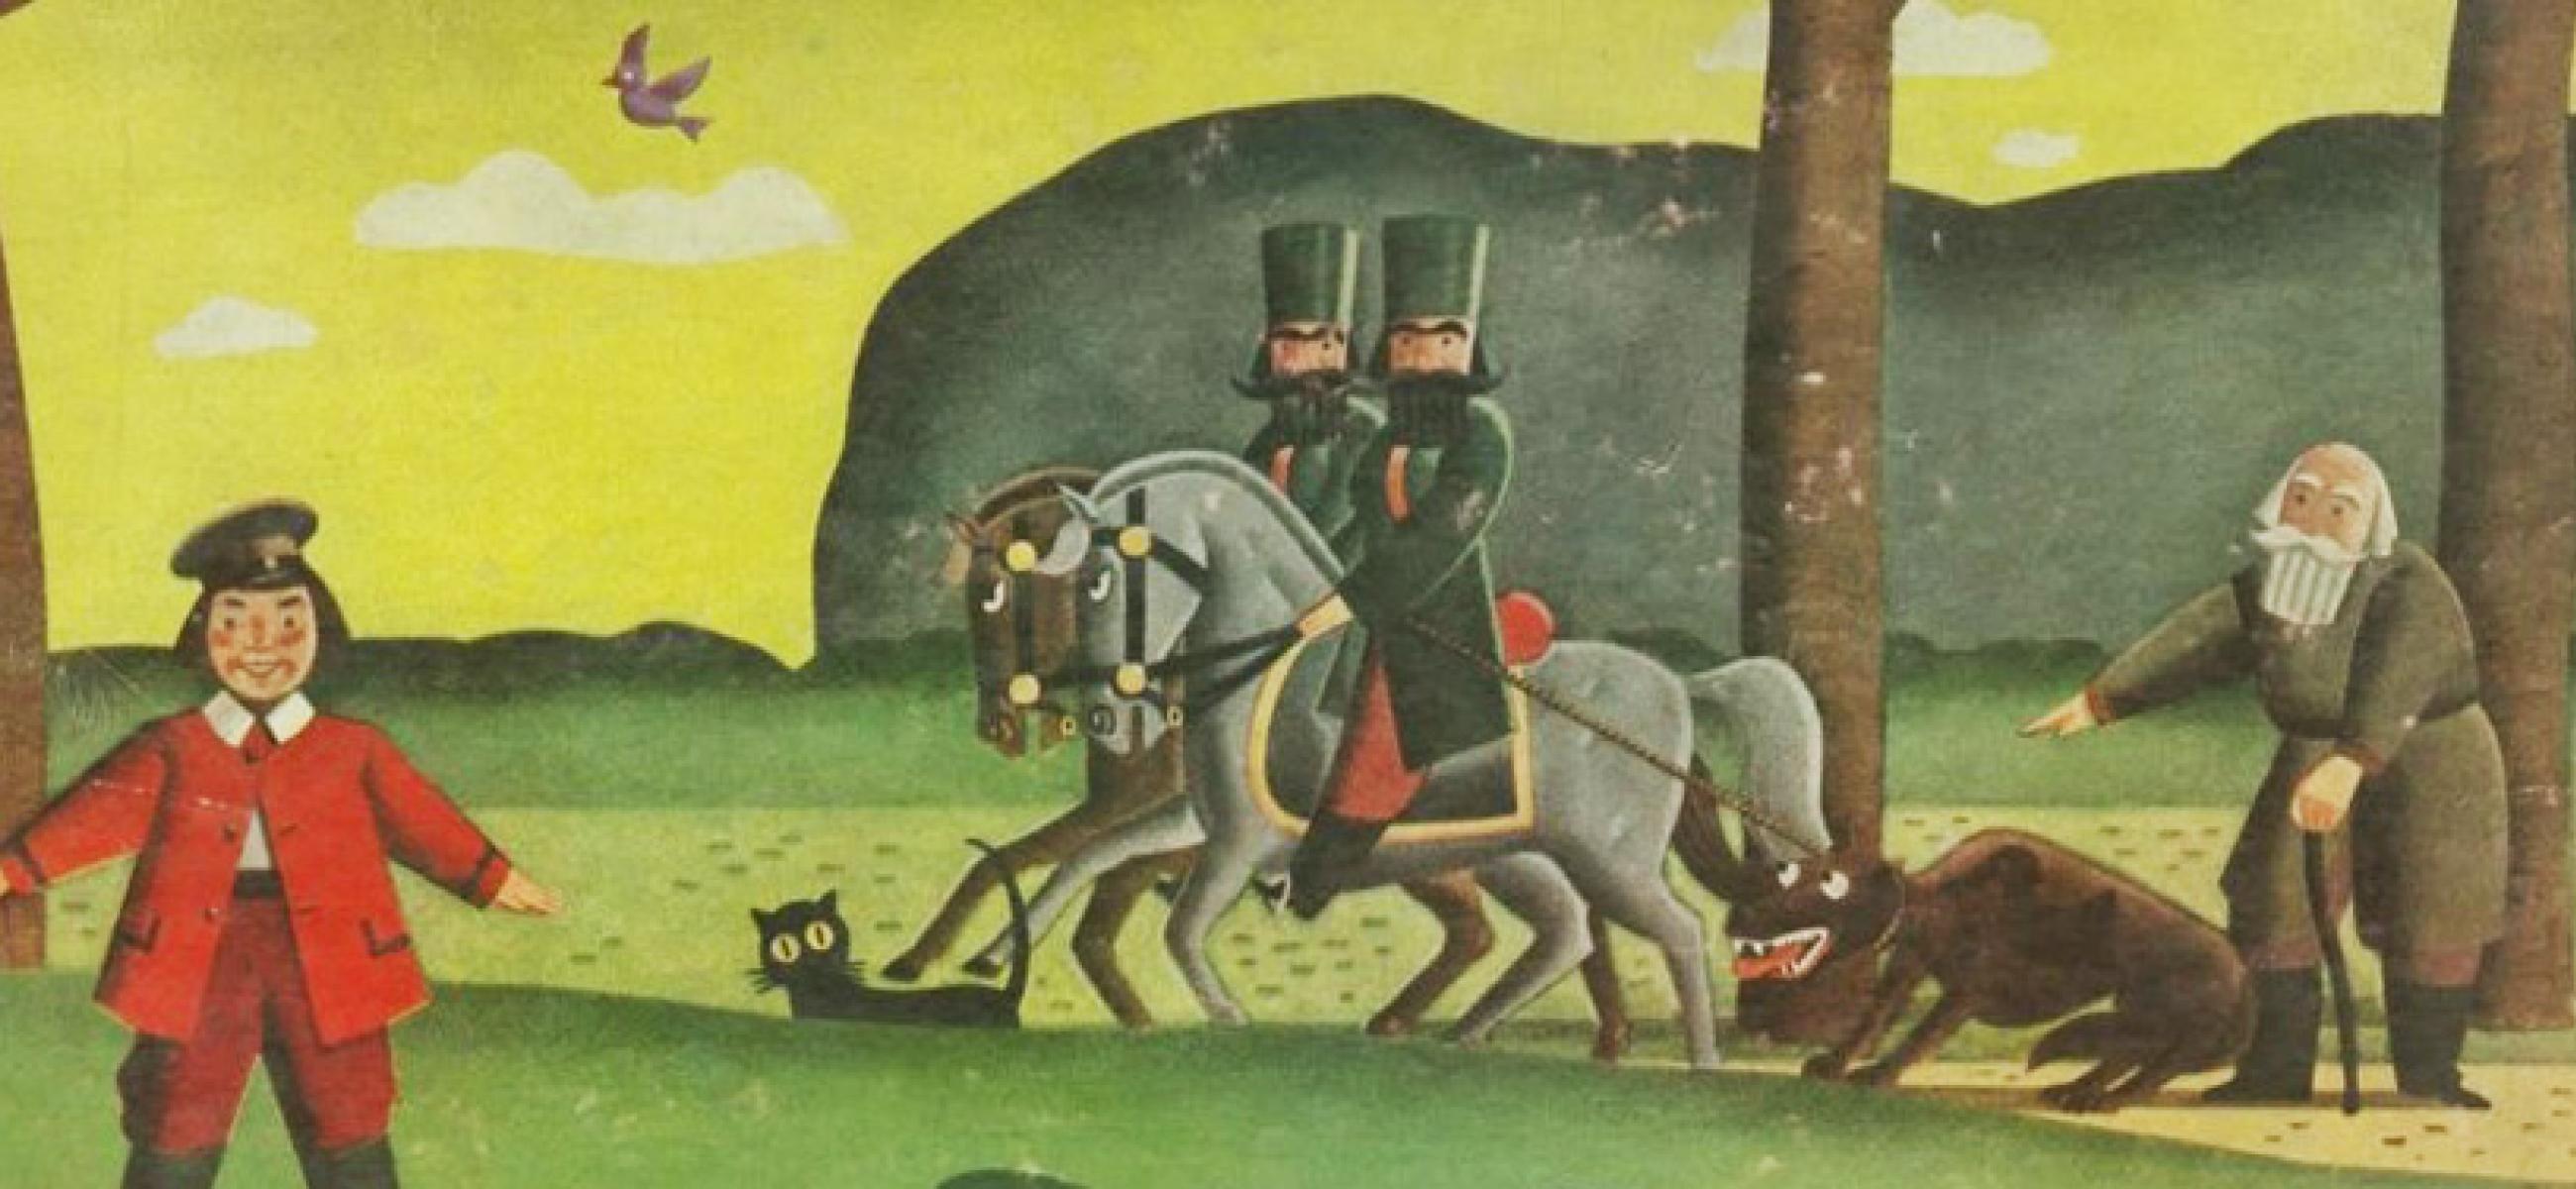 colorful illustration of hunters from an earlier century